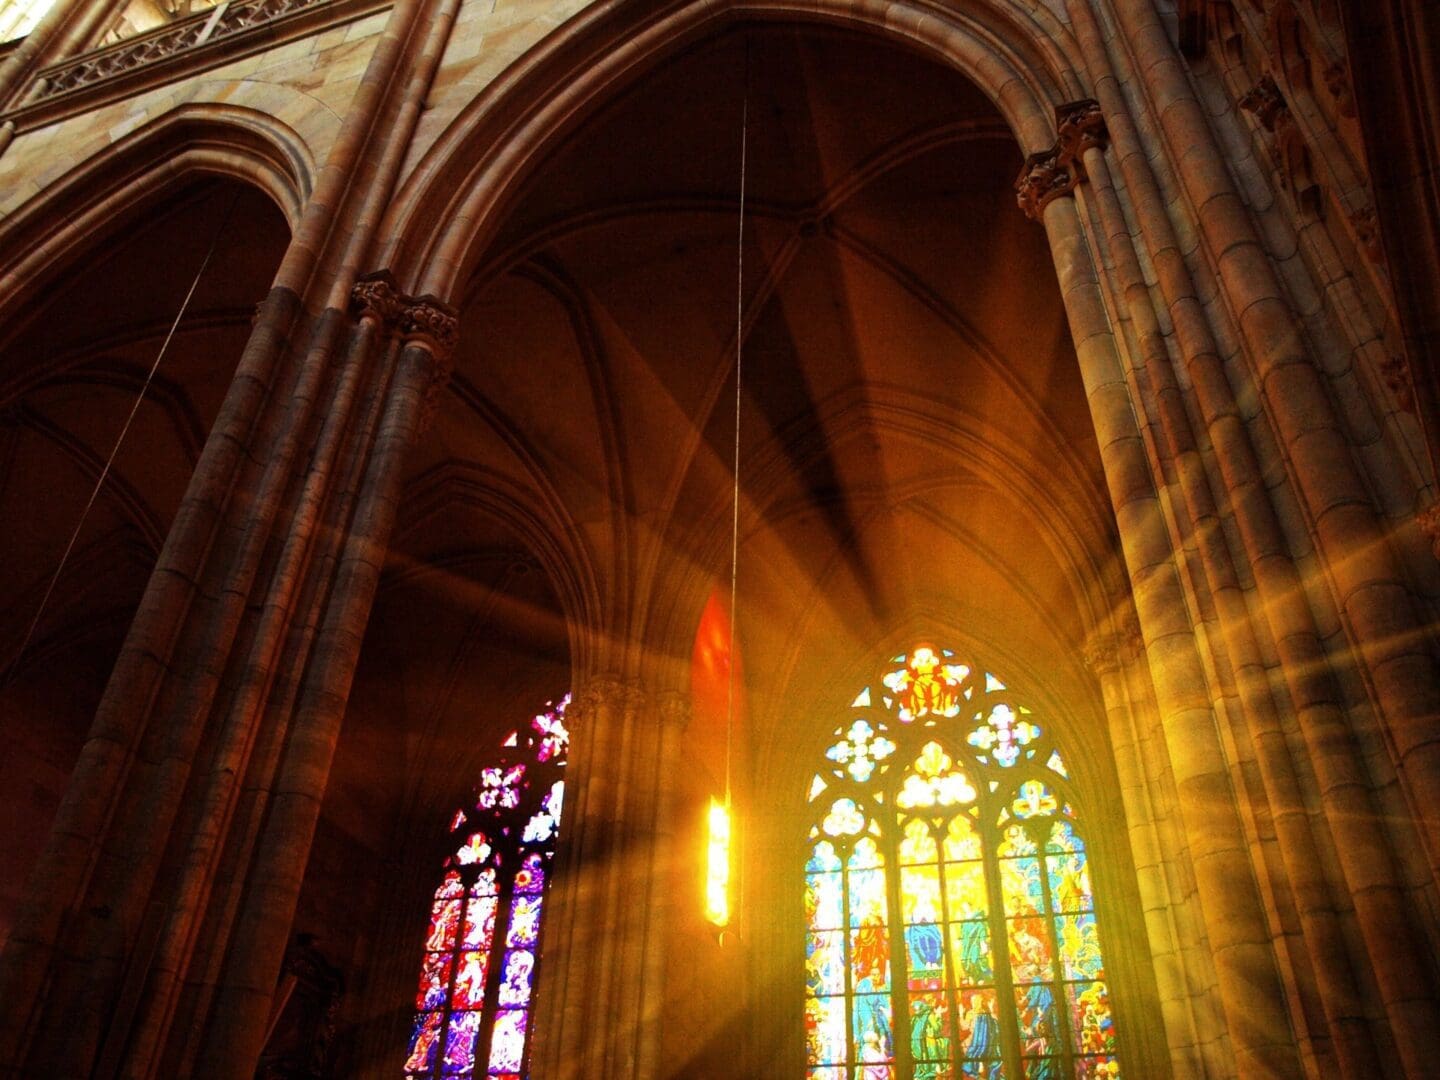 The sun is shining through a window in a cathedral.